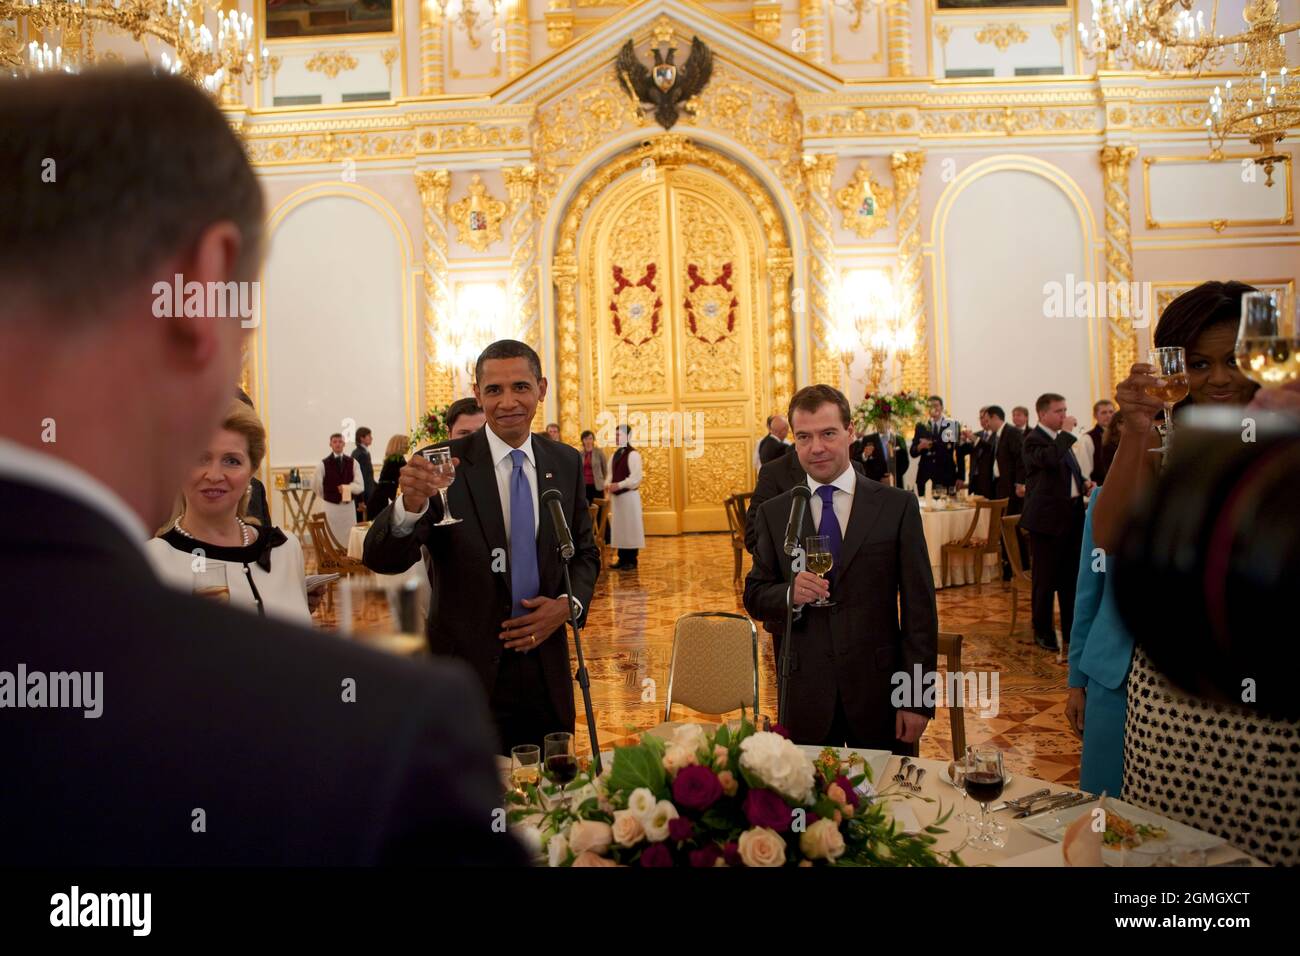 President Barack Obama and First Lady Michelle Obama attend a reception in the Kremlin with Russian President Dimitry Medvedev, his wife Svetlana Medvedeva, and the Russian Orthodox Patriarch Moscow, Russia, July 7, 2009 (Official White House Photo by Pete Souza)  This official White House photograph is being made available for publication by news organizations and/or for personal use printing by the subject(s) of the photograph. The photograph may not be manipulated in any way or used in materials, advertisements, products, or promotions that in any way suggest approval or endorsement of the Stock Photo